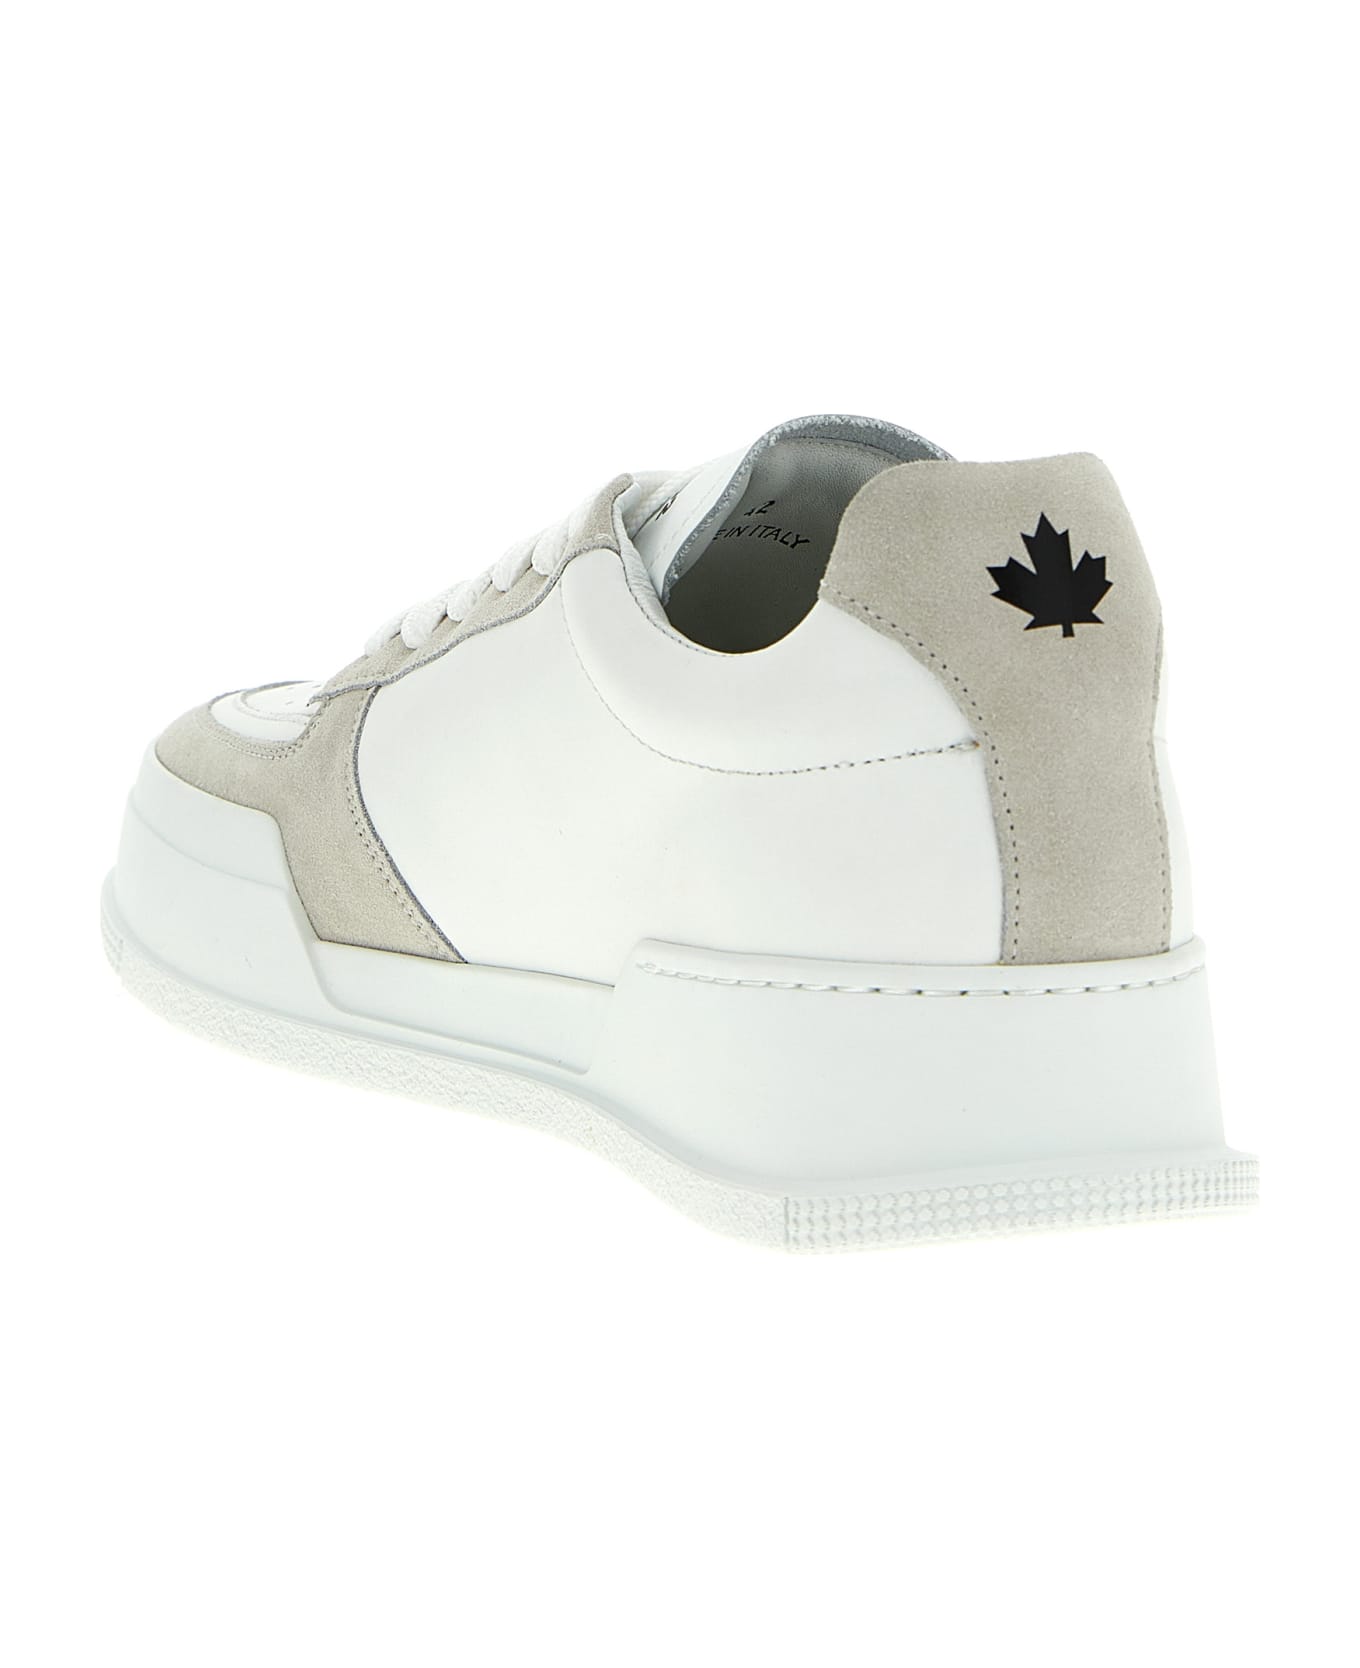 Dsquared2 Canadian Leather Sneakers - White